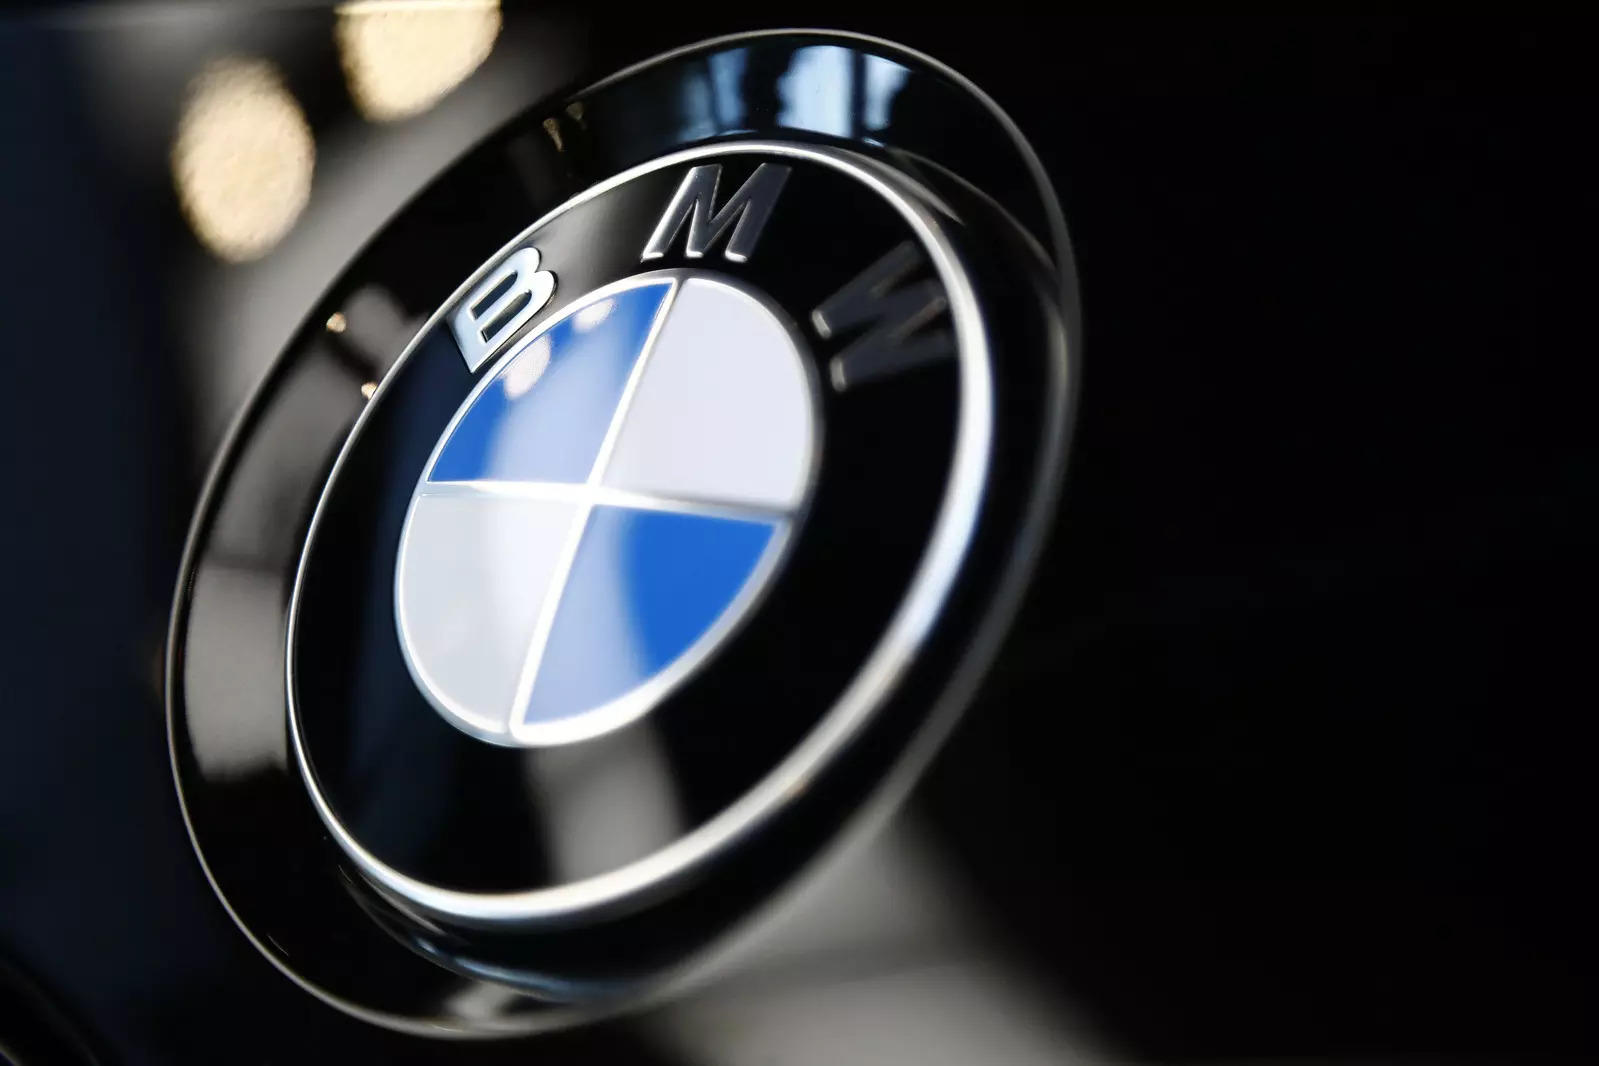 IT company CEO gifts BMWs to employees who helped company 'dig gold'